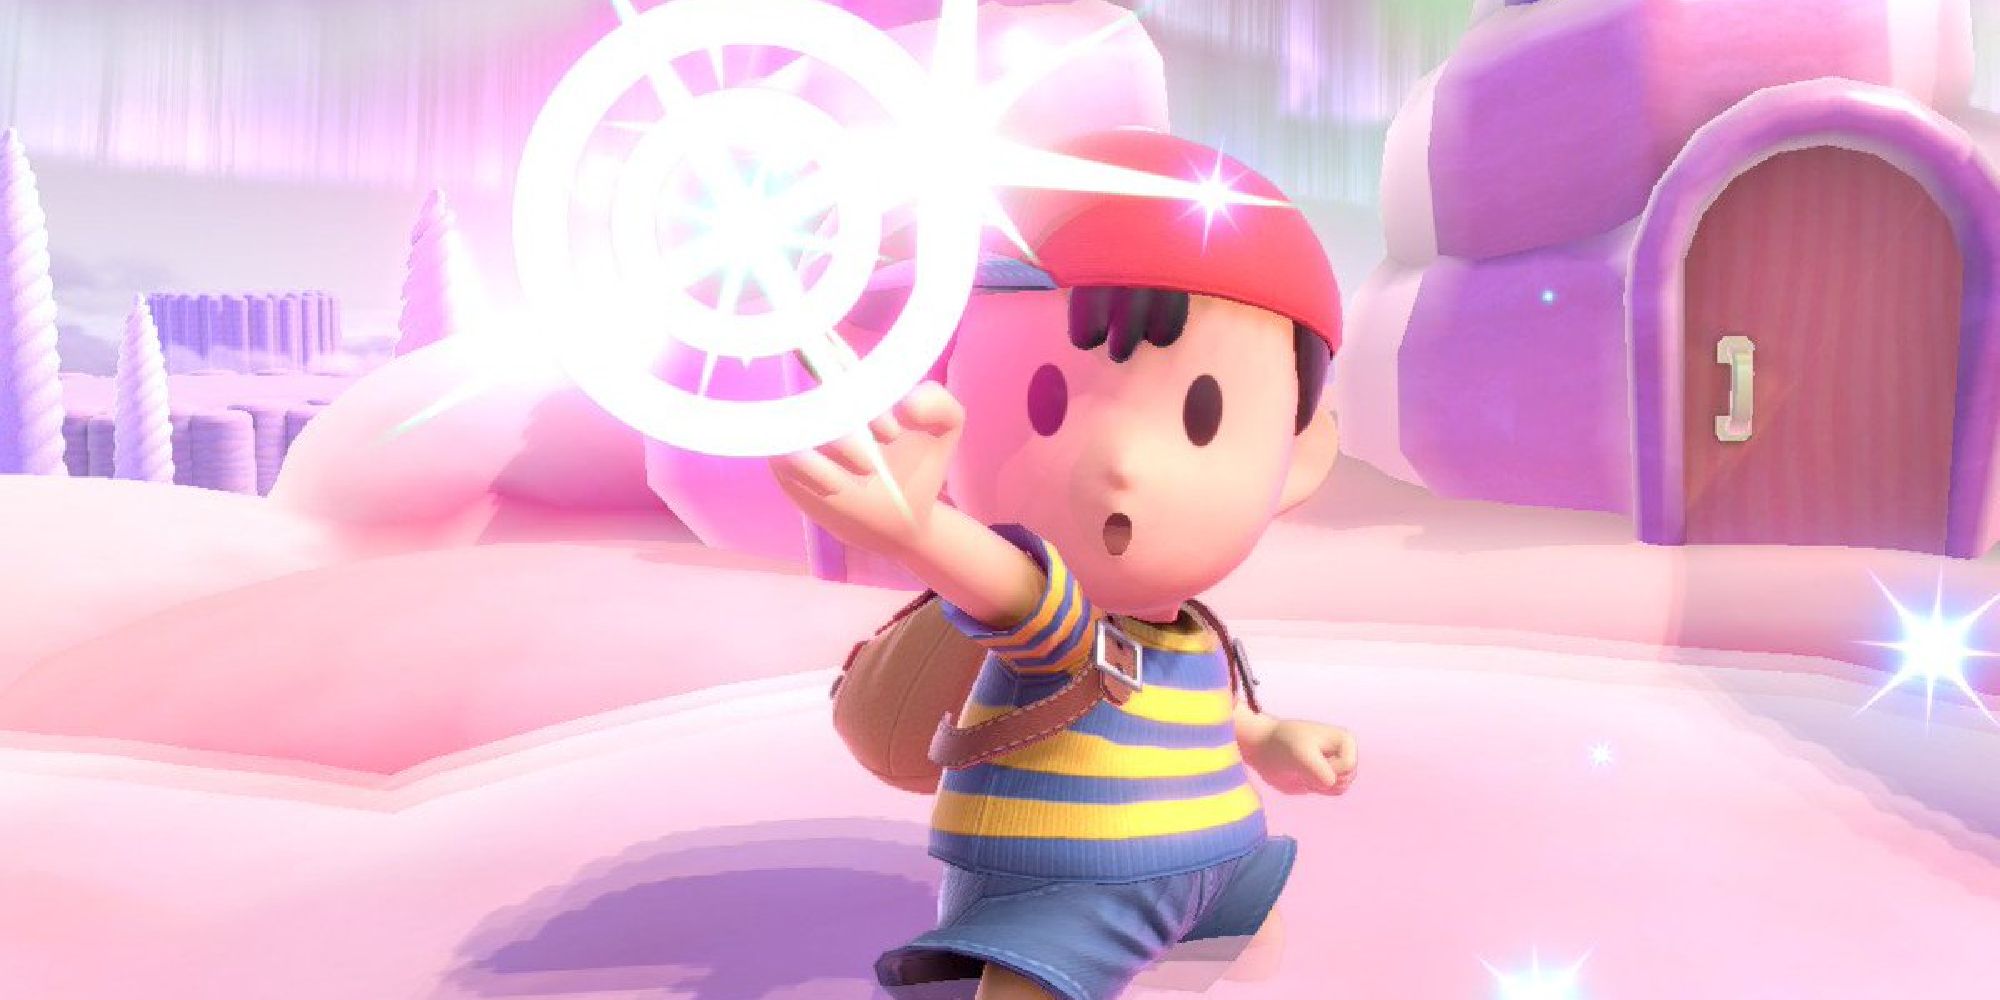 Ness taunting in the Magicant stage